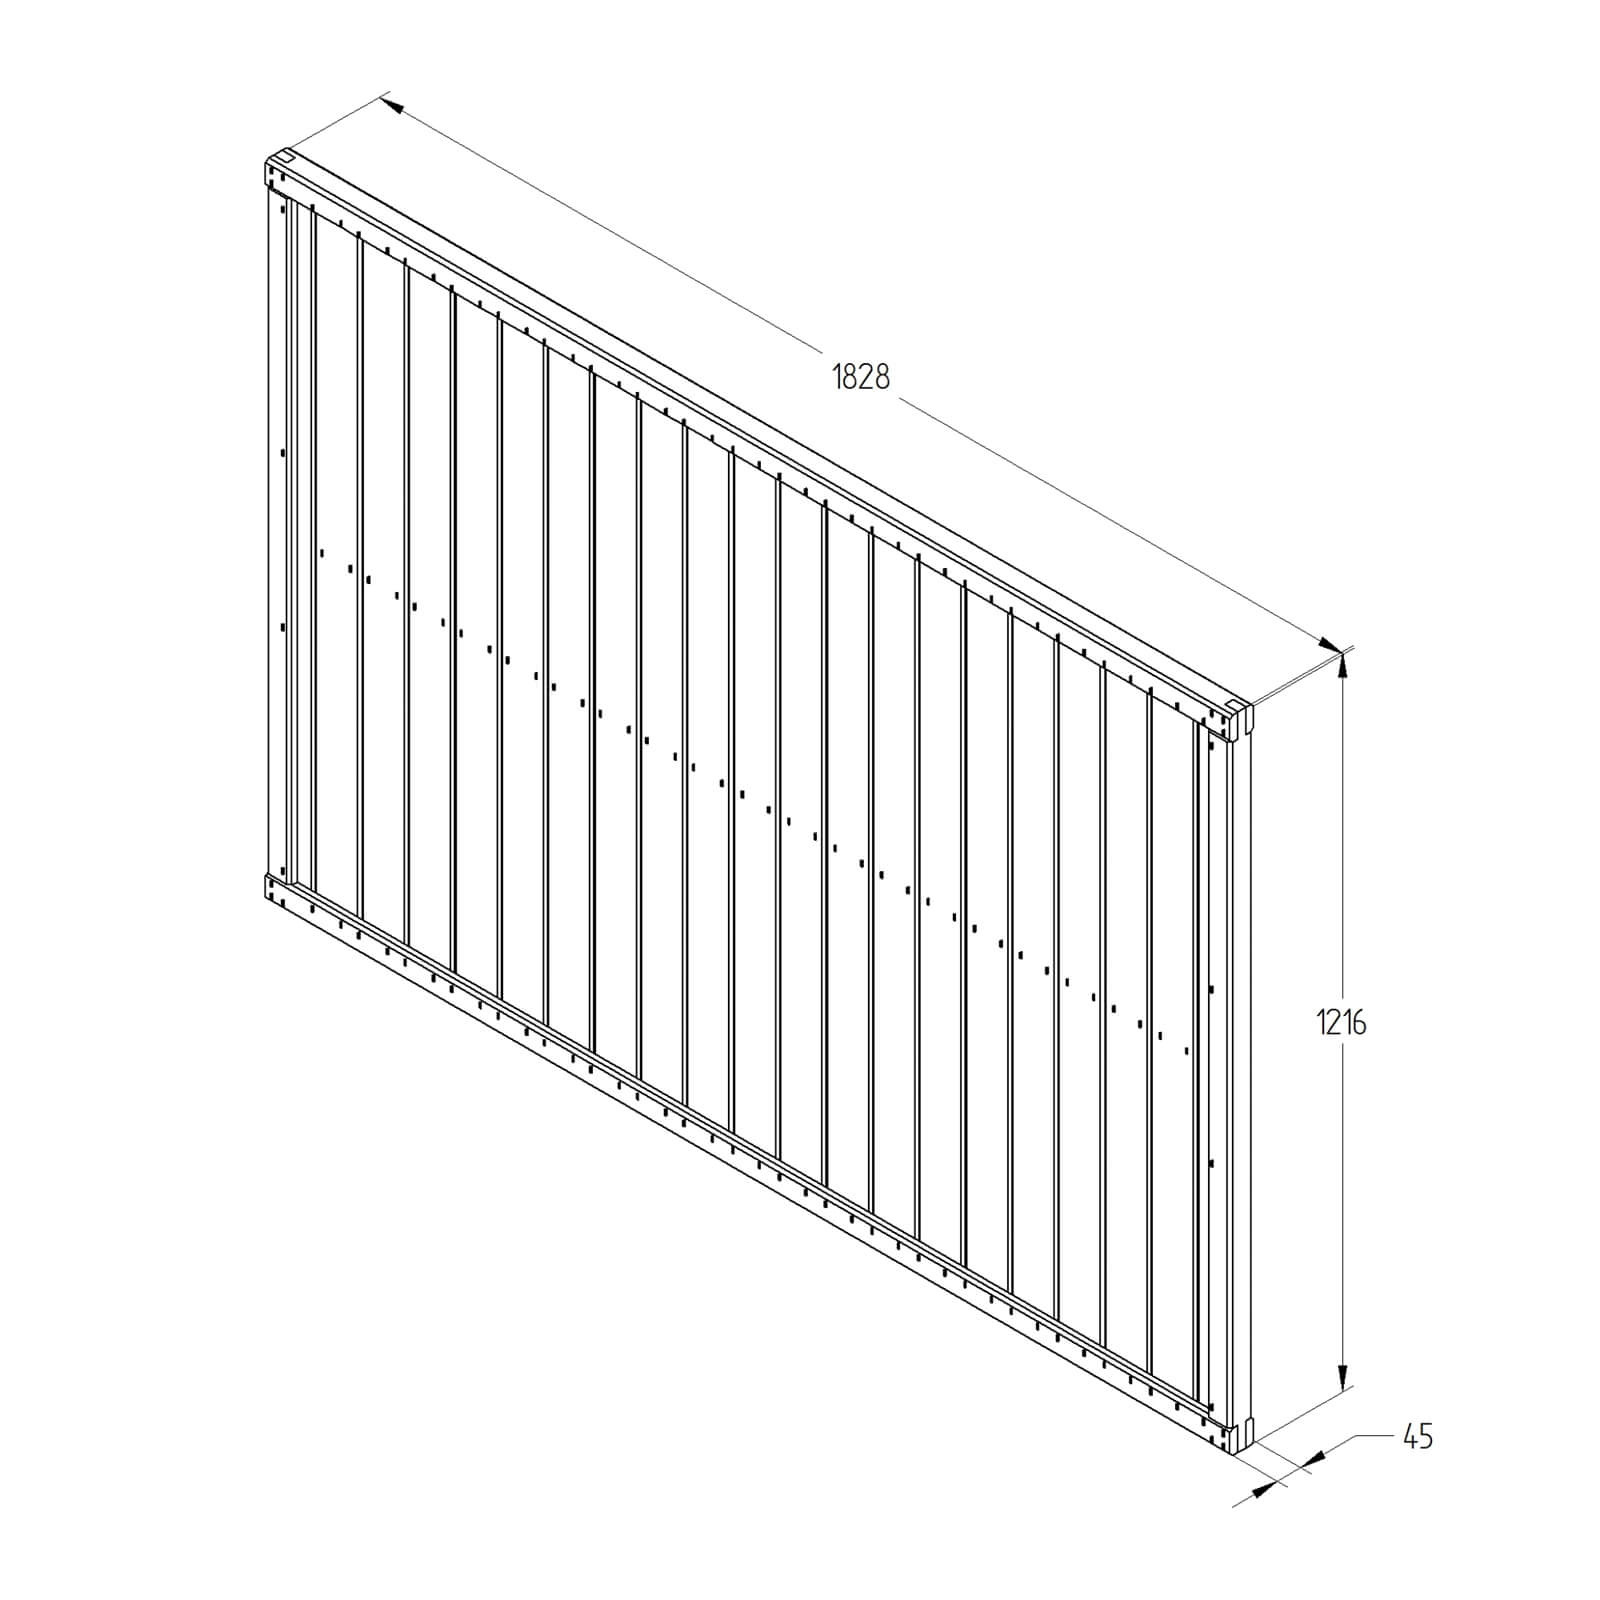 Forest Vertical Tongue & Groove Fence Panel - 4ft - Pack of 5